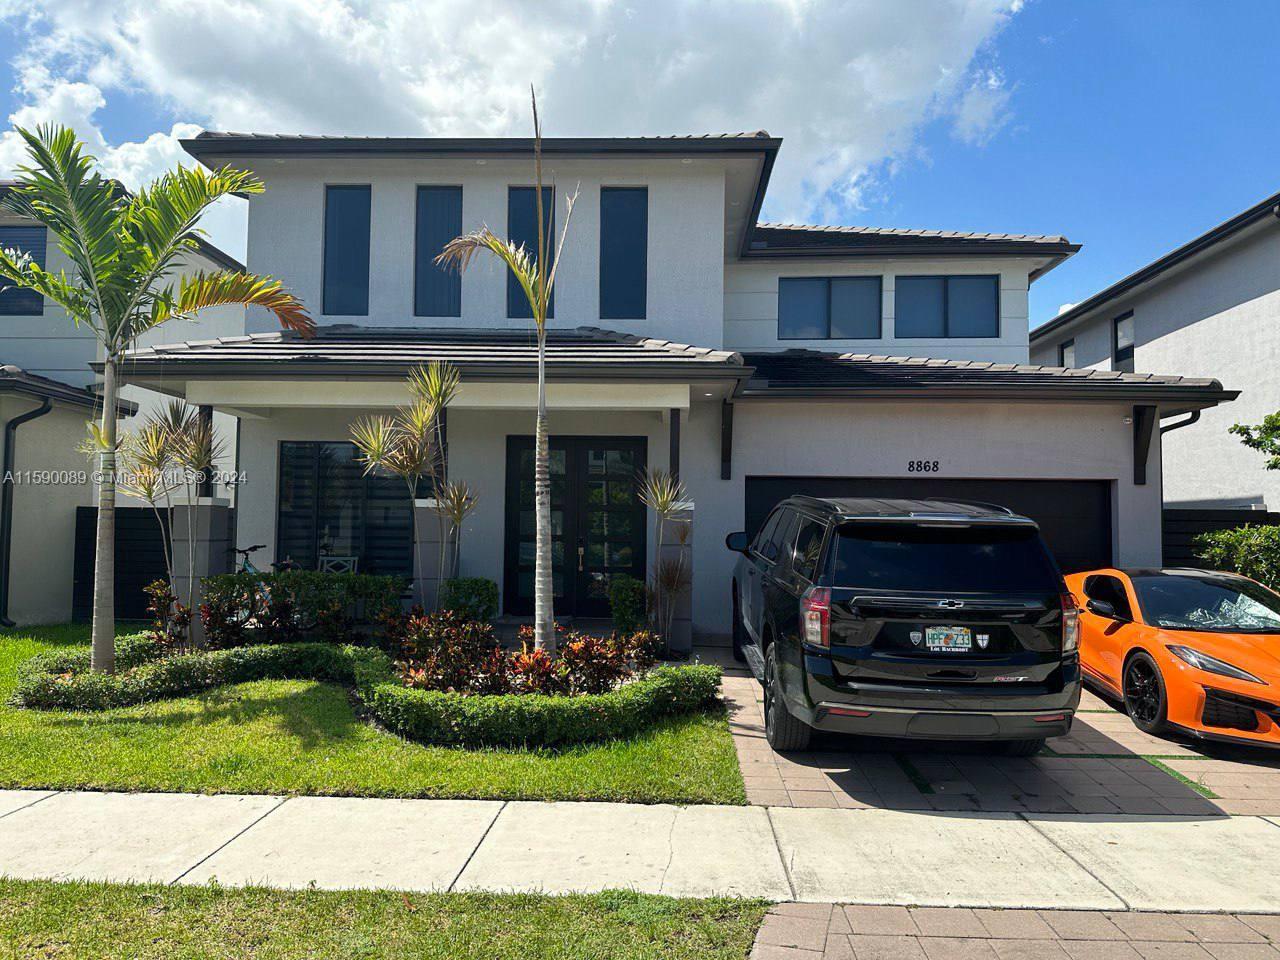 Property for Sale at 8868 Nw 161st Ter, Miami Lakes, Miami-Dade County, Florida - Bedrooms: 4 
Bathrooms: 3  - $1,250,000